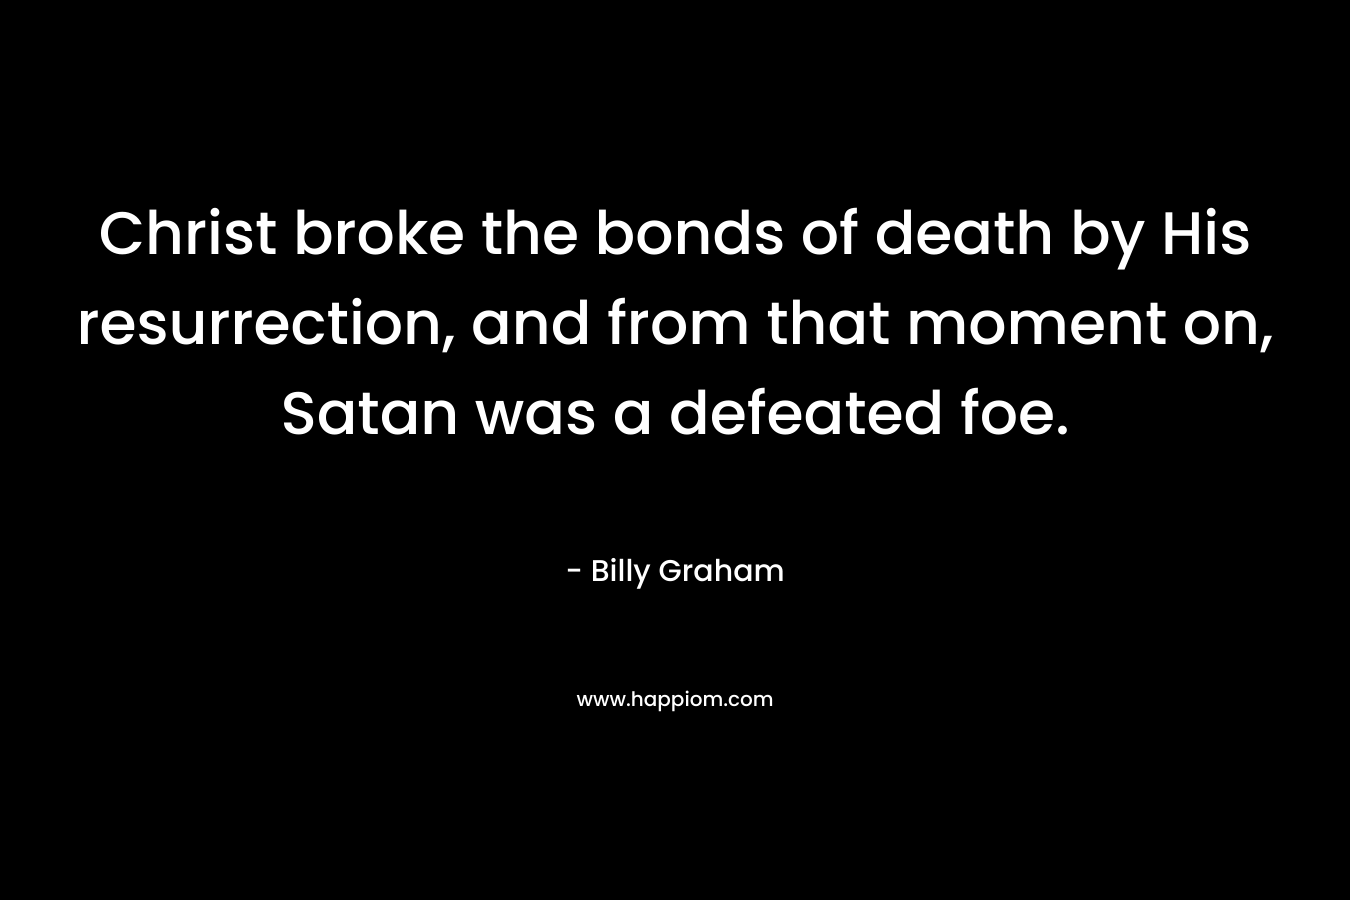 Christ broke the bonds of death by His resurrection, and from that moment on, Satan was a defeated foe. – Billy Graham